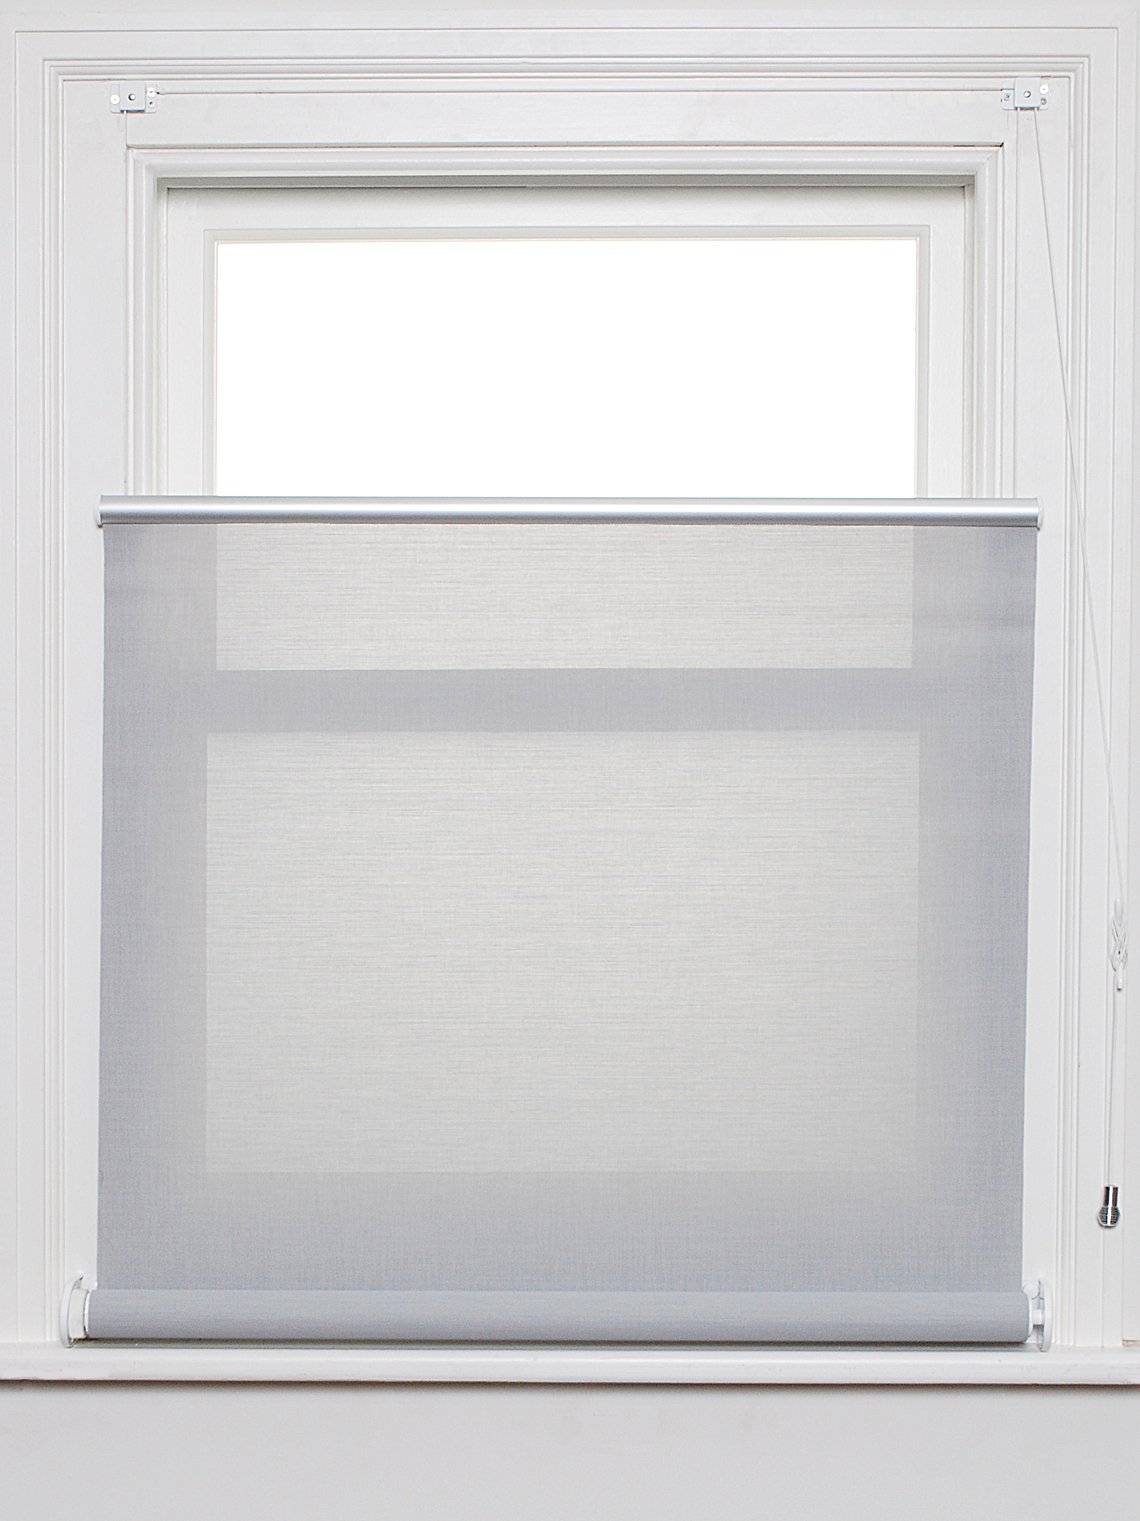 Double Roller Blind Side Pull Roller Blind Blackwater Cream 45-180 cm wide with Aluminium Tape 